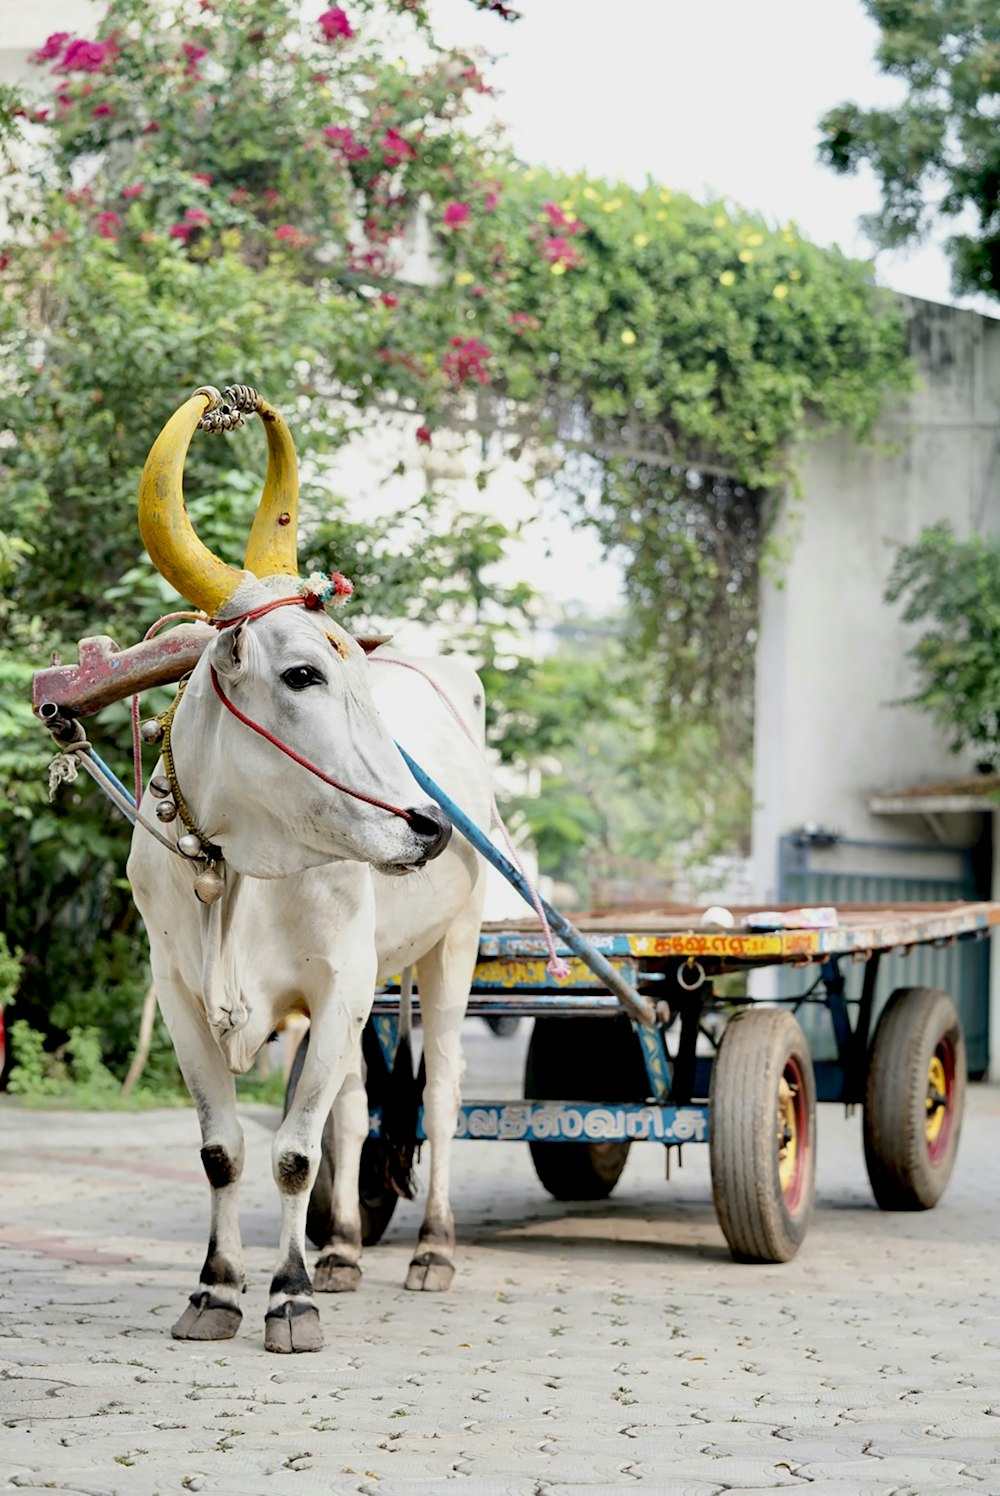 a white ox pulling a cart with a yellow horn